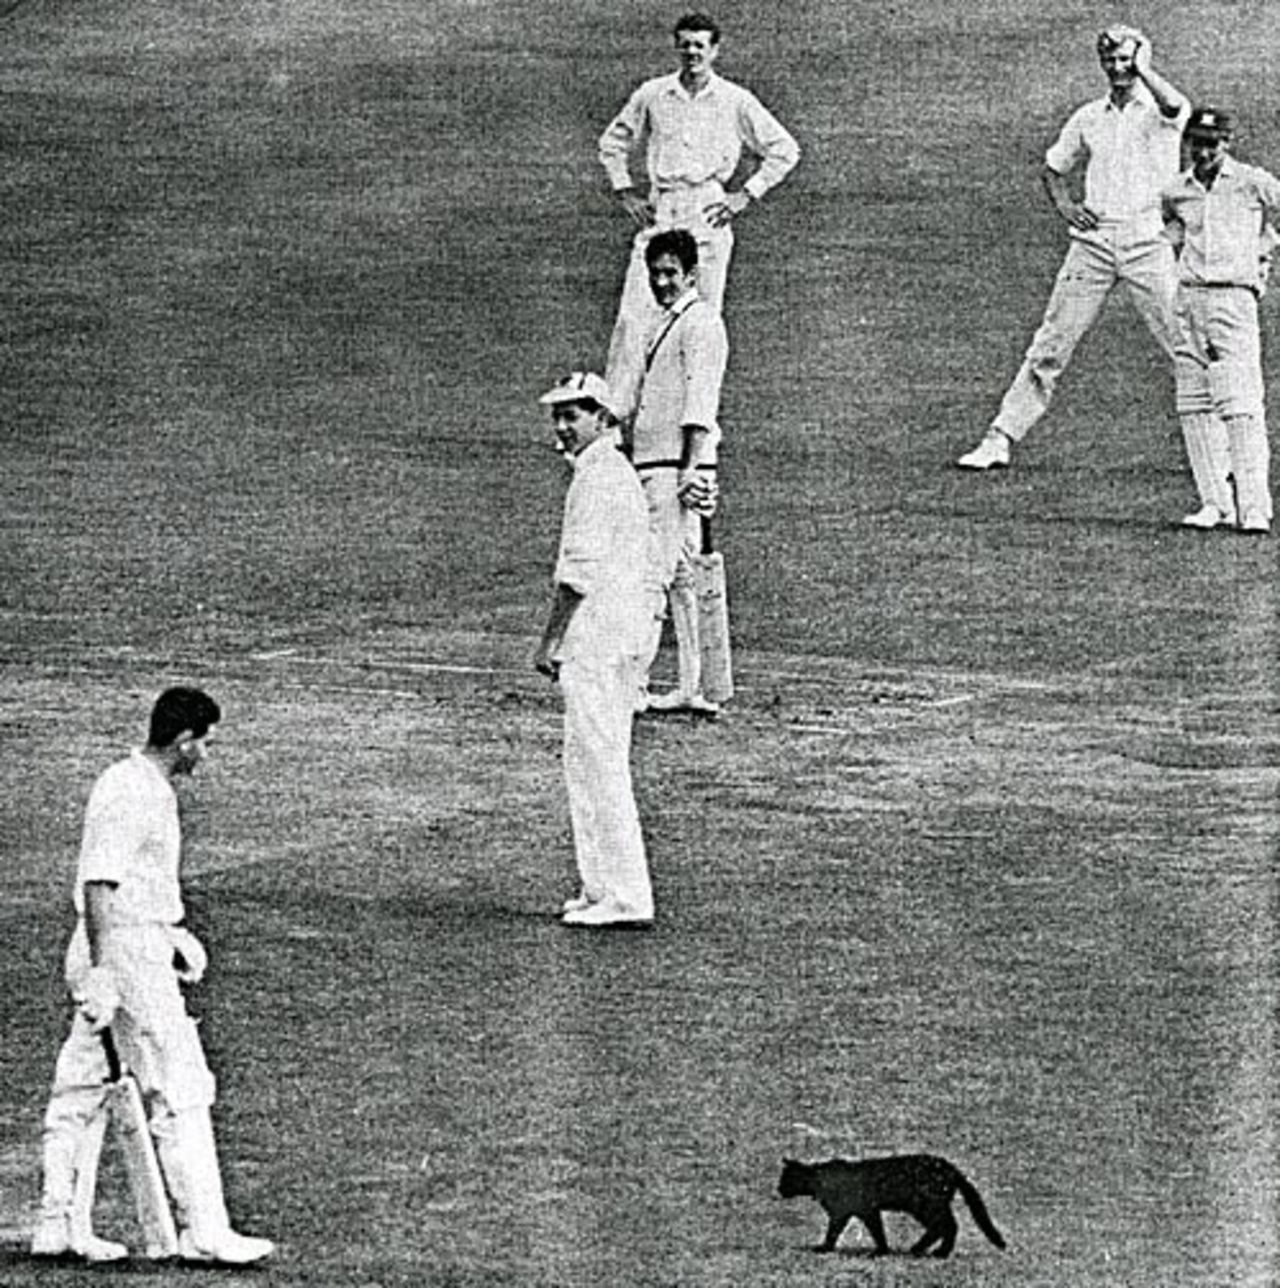 Sinbad, Lord's' replacement for Peter the cat, ambles across the outfield during the match between Southern Schools and The Rest, August 1963